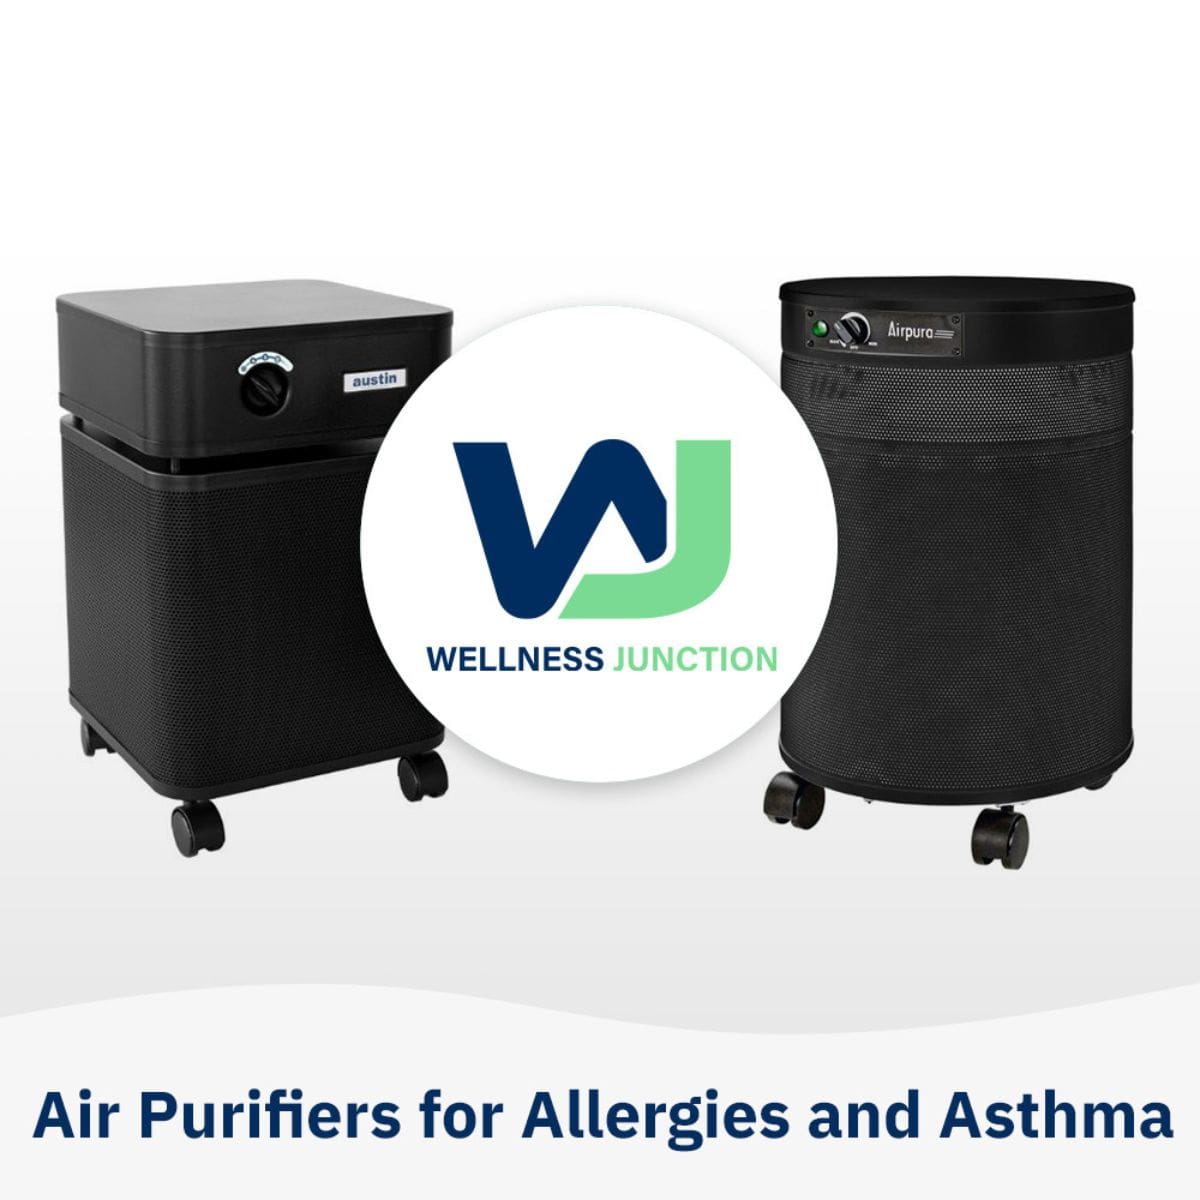 Air Purifiers for Allergies and Asthma